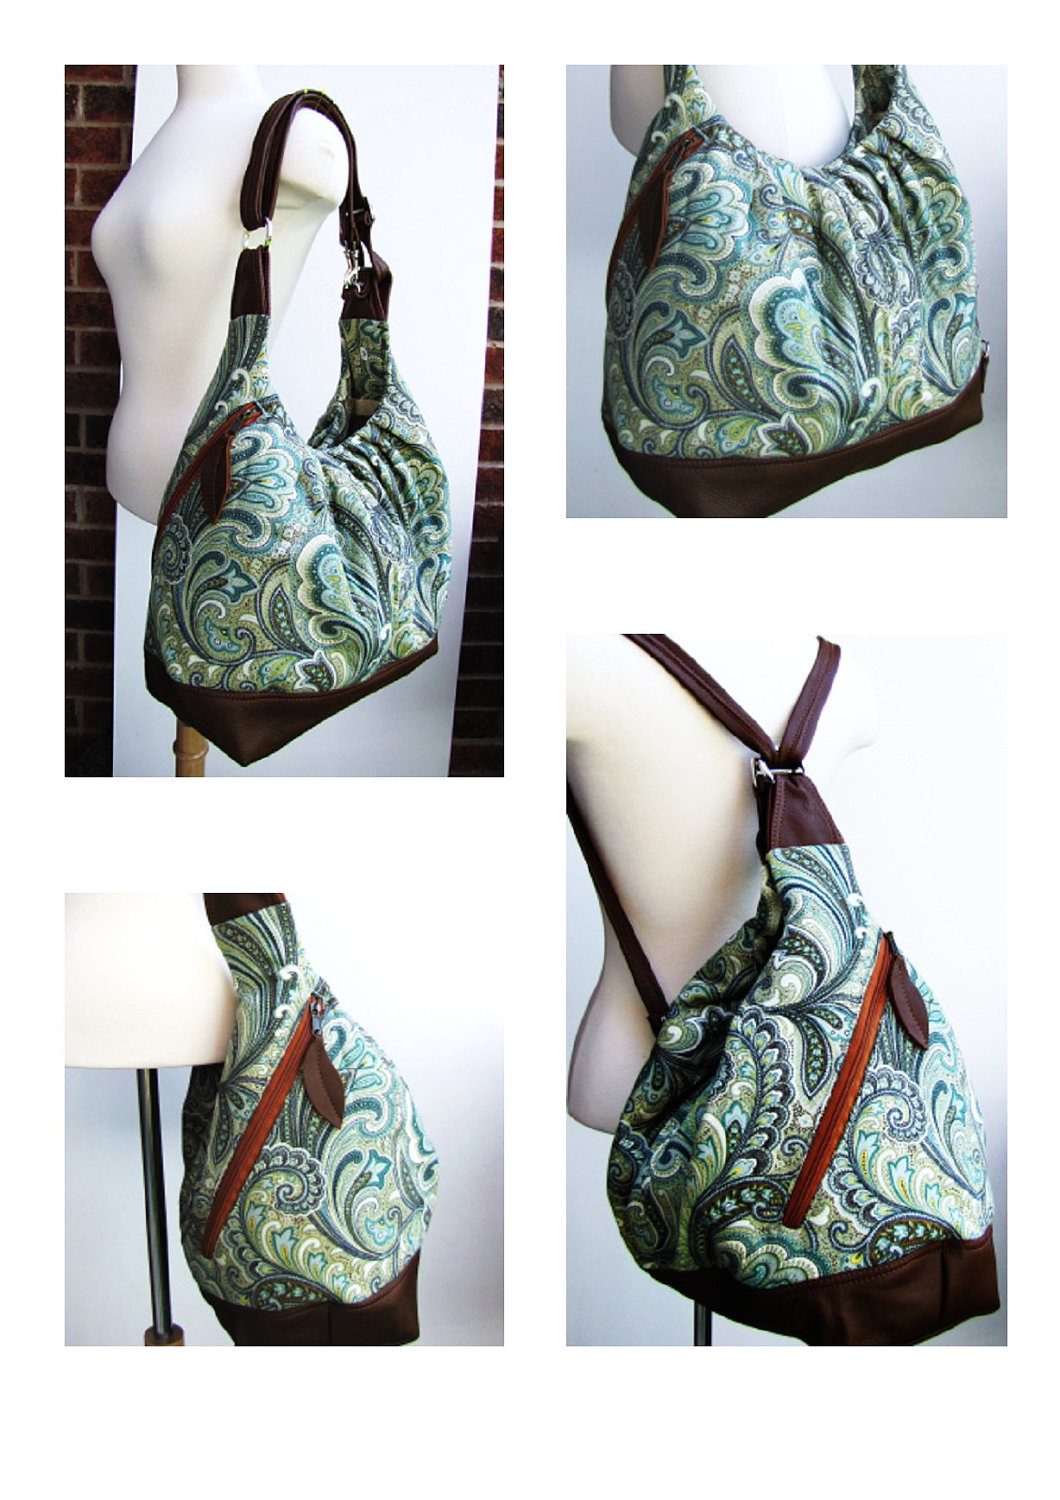 Green paisley canvas bag, extra large 3 ways convertible tote w/ leather straps, base, zipper top closure - Paisley